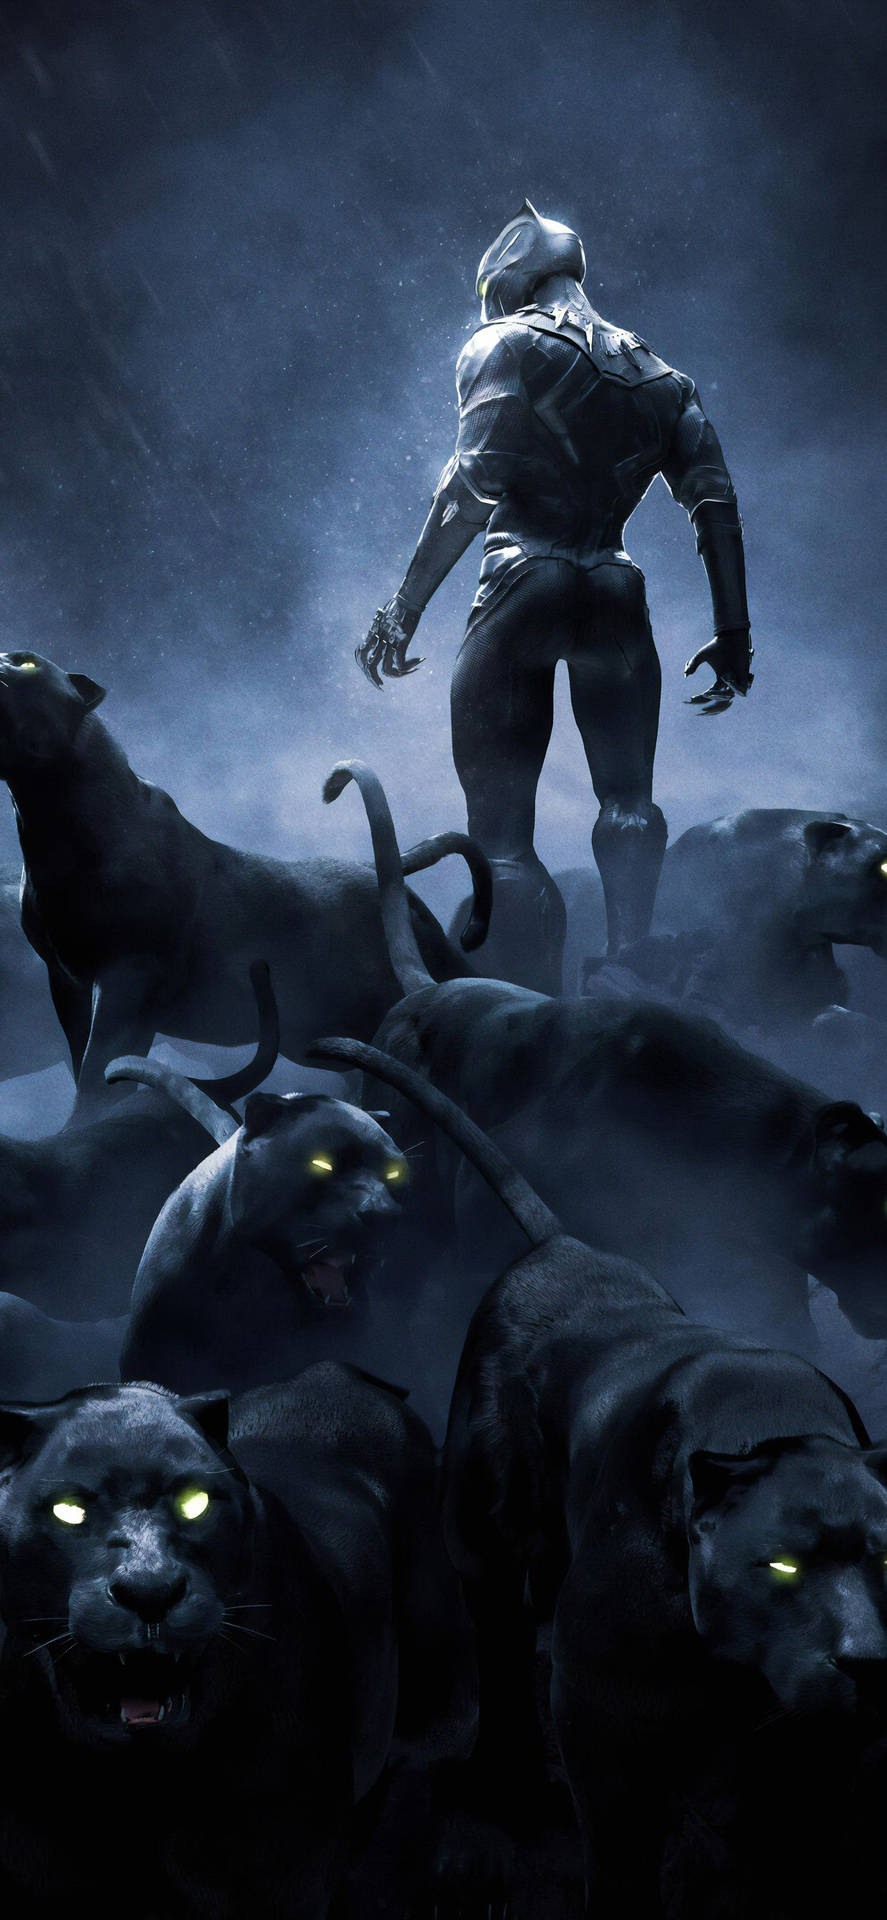 T'challa Black Panther Android Background